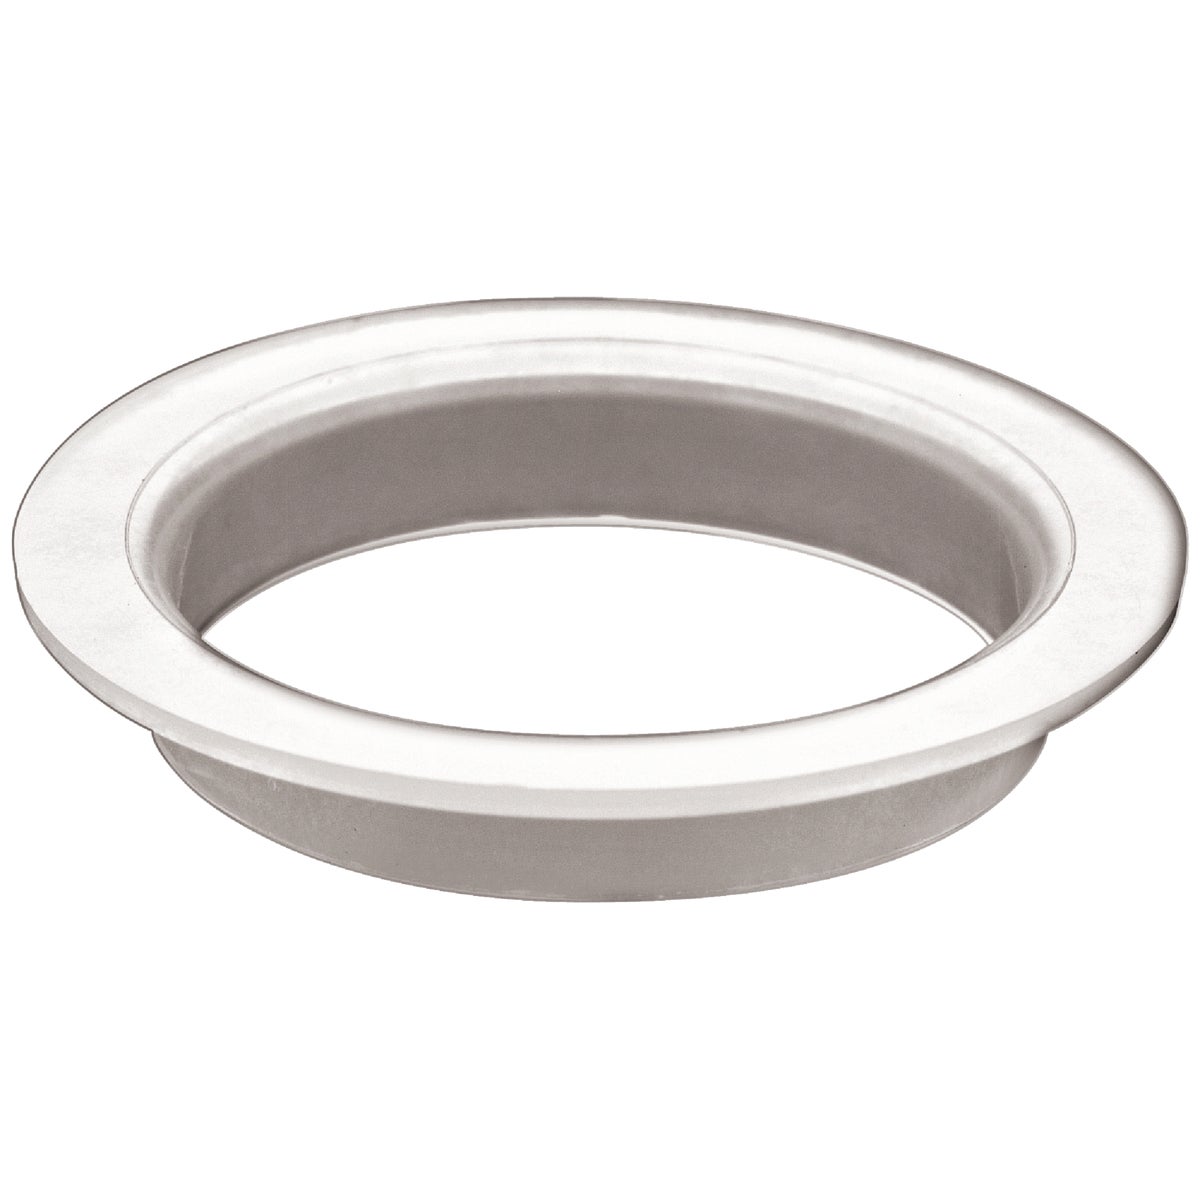 Item 443988, Tailpiece washer. 1-1/2". Do it bagged.<br>
<br><b>No. 443988:</b> Strainer Size: 1-1/2 In., Pkg Qty: 1, Package Type: Bag